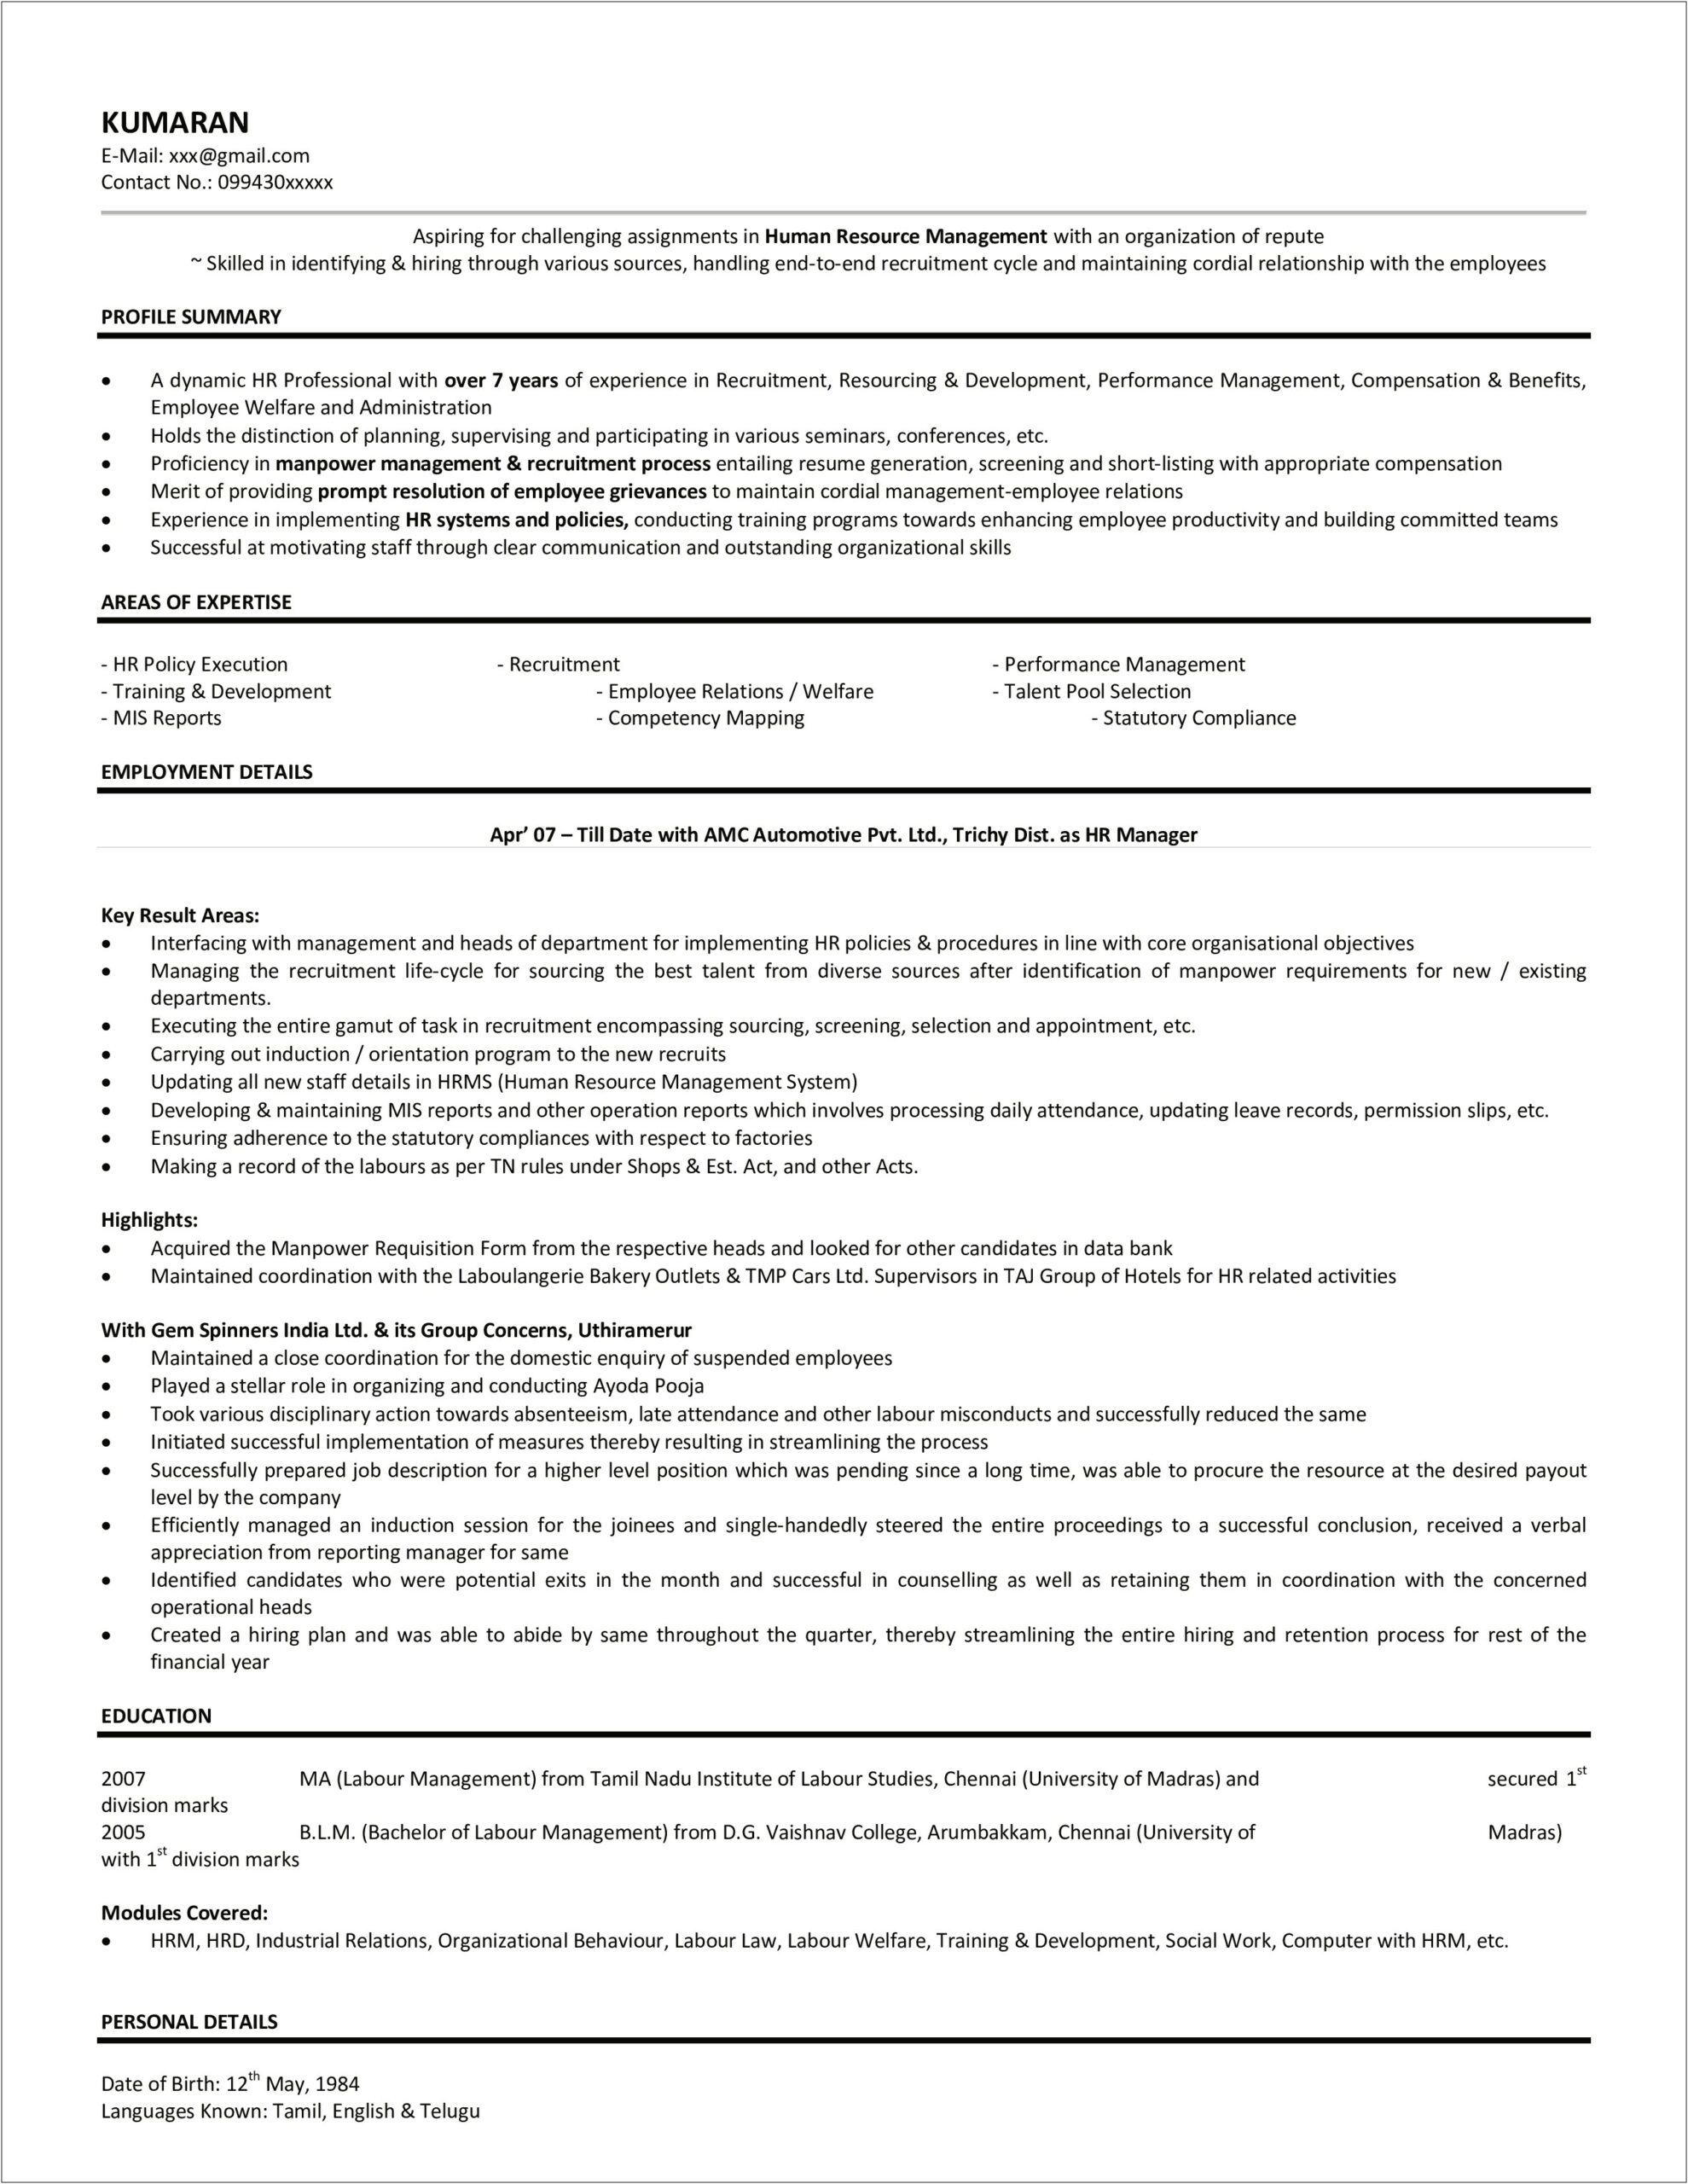 Resume For Statutory Compliance Manager